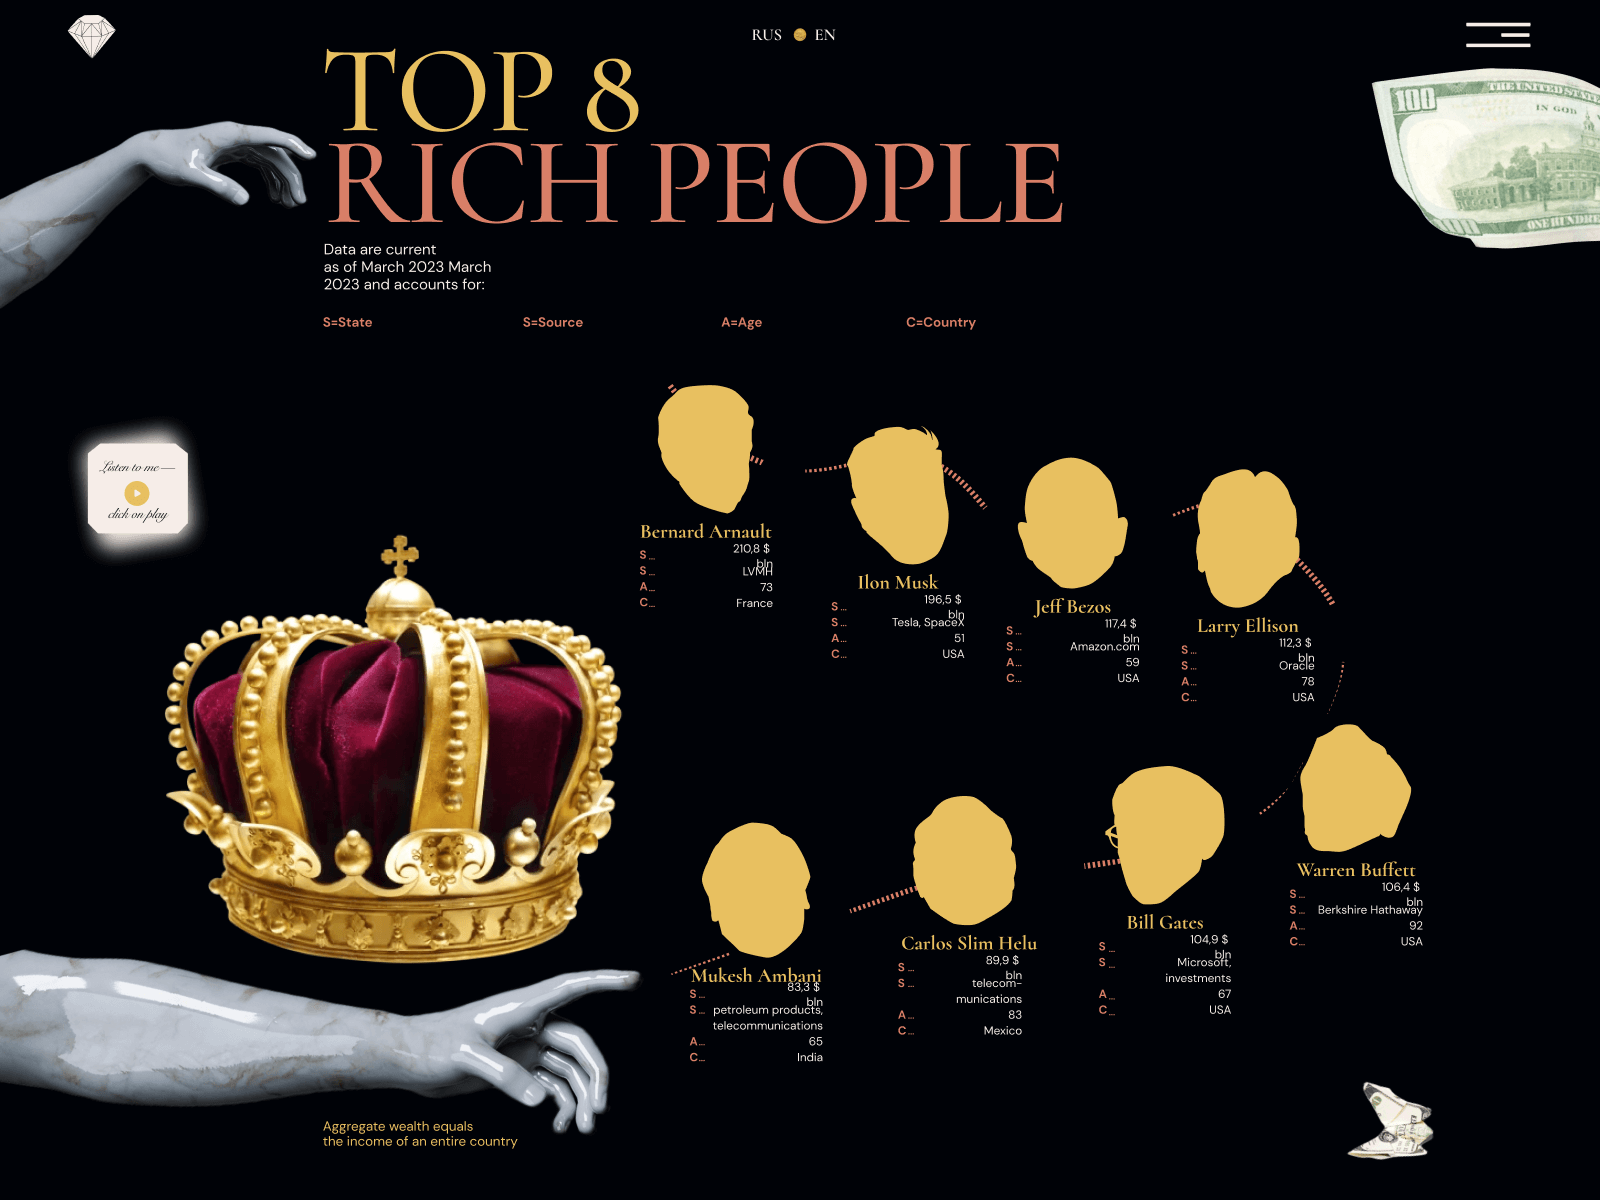 Display of the rich